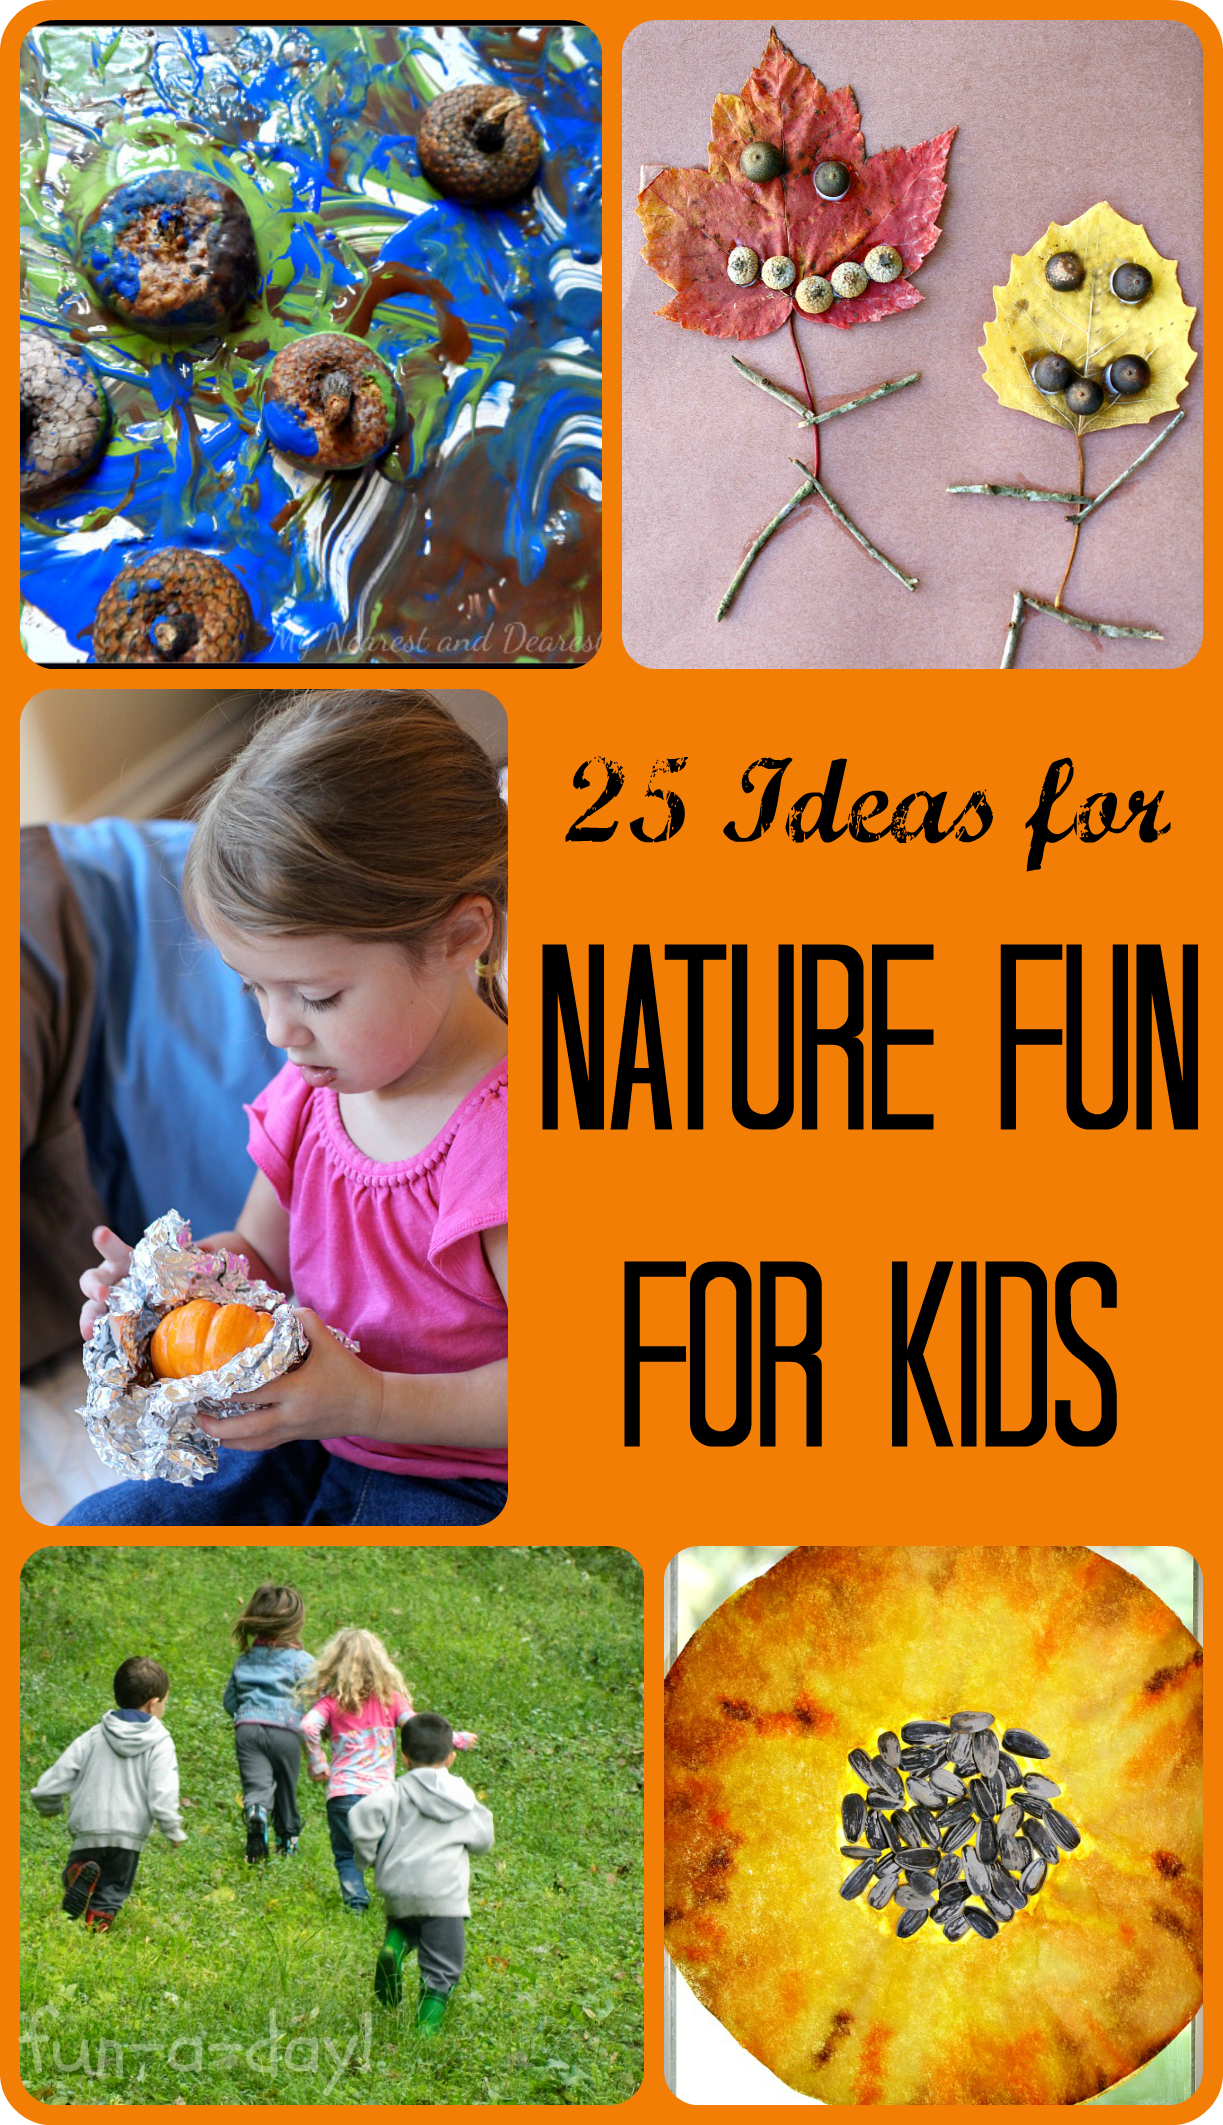 Nature Fun for Kids from Share It Saturday